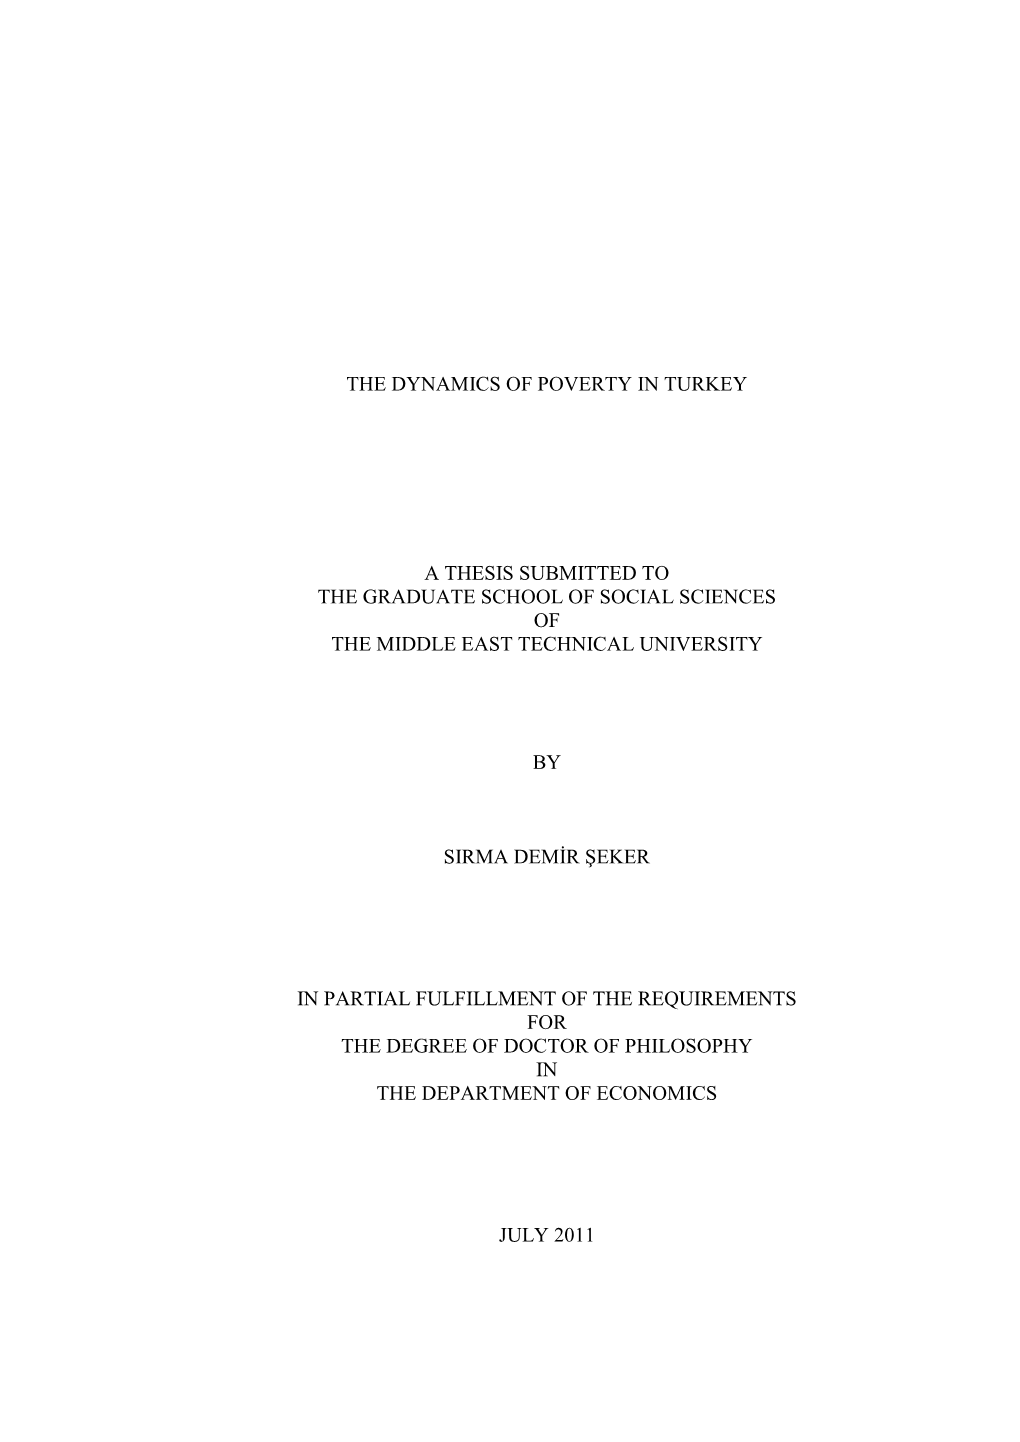 The Dynamics of Poverty in Turkey a Thesis